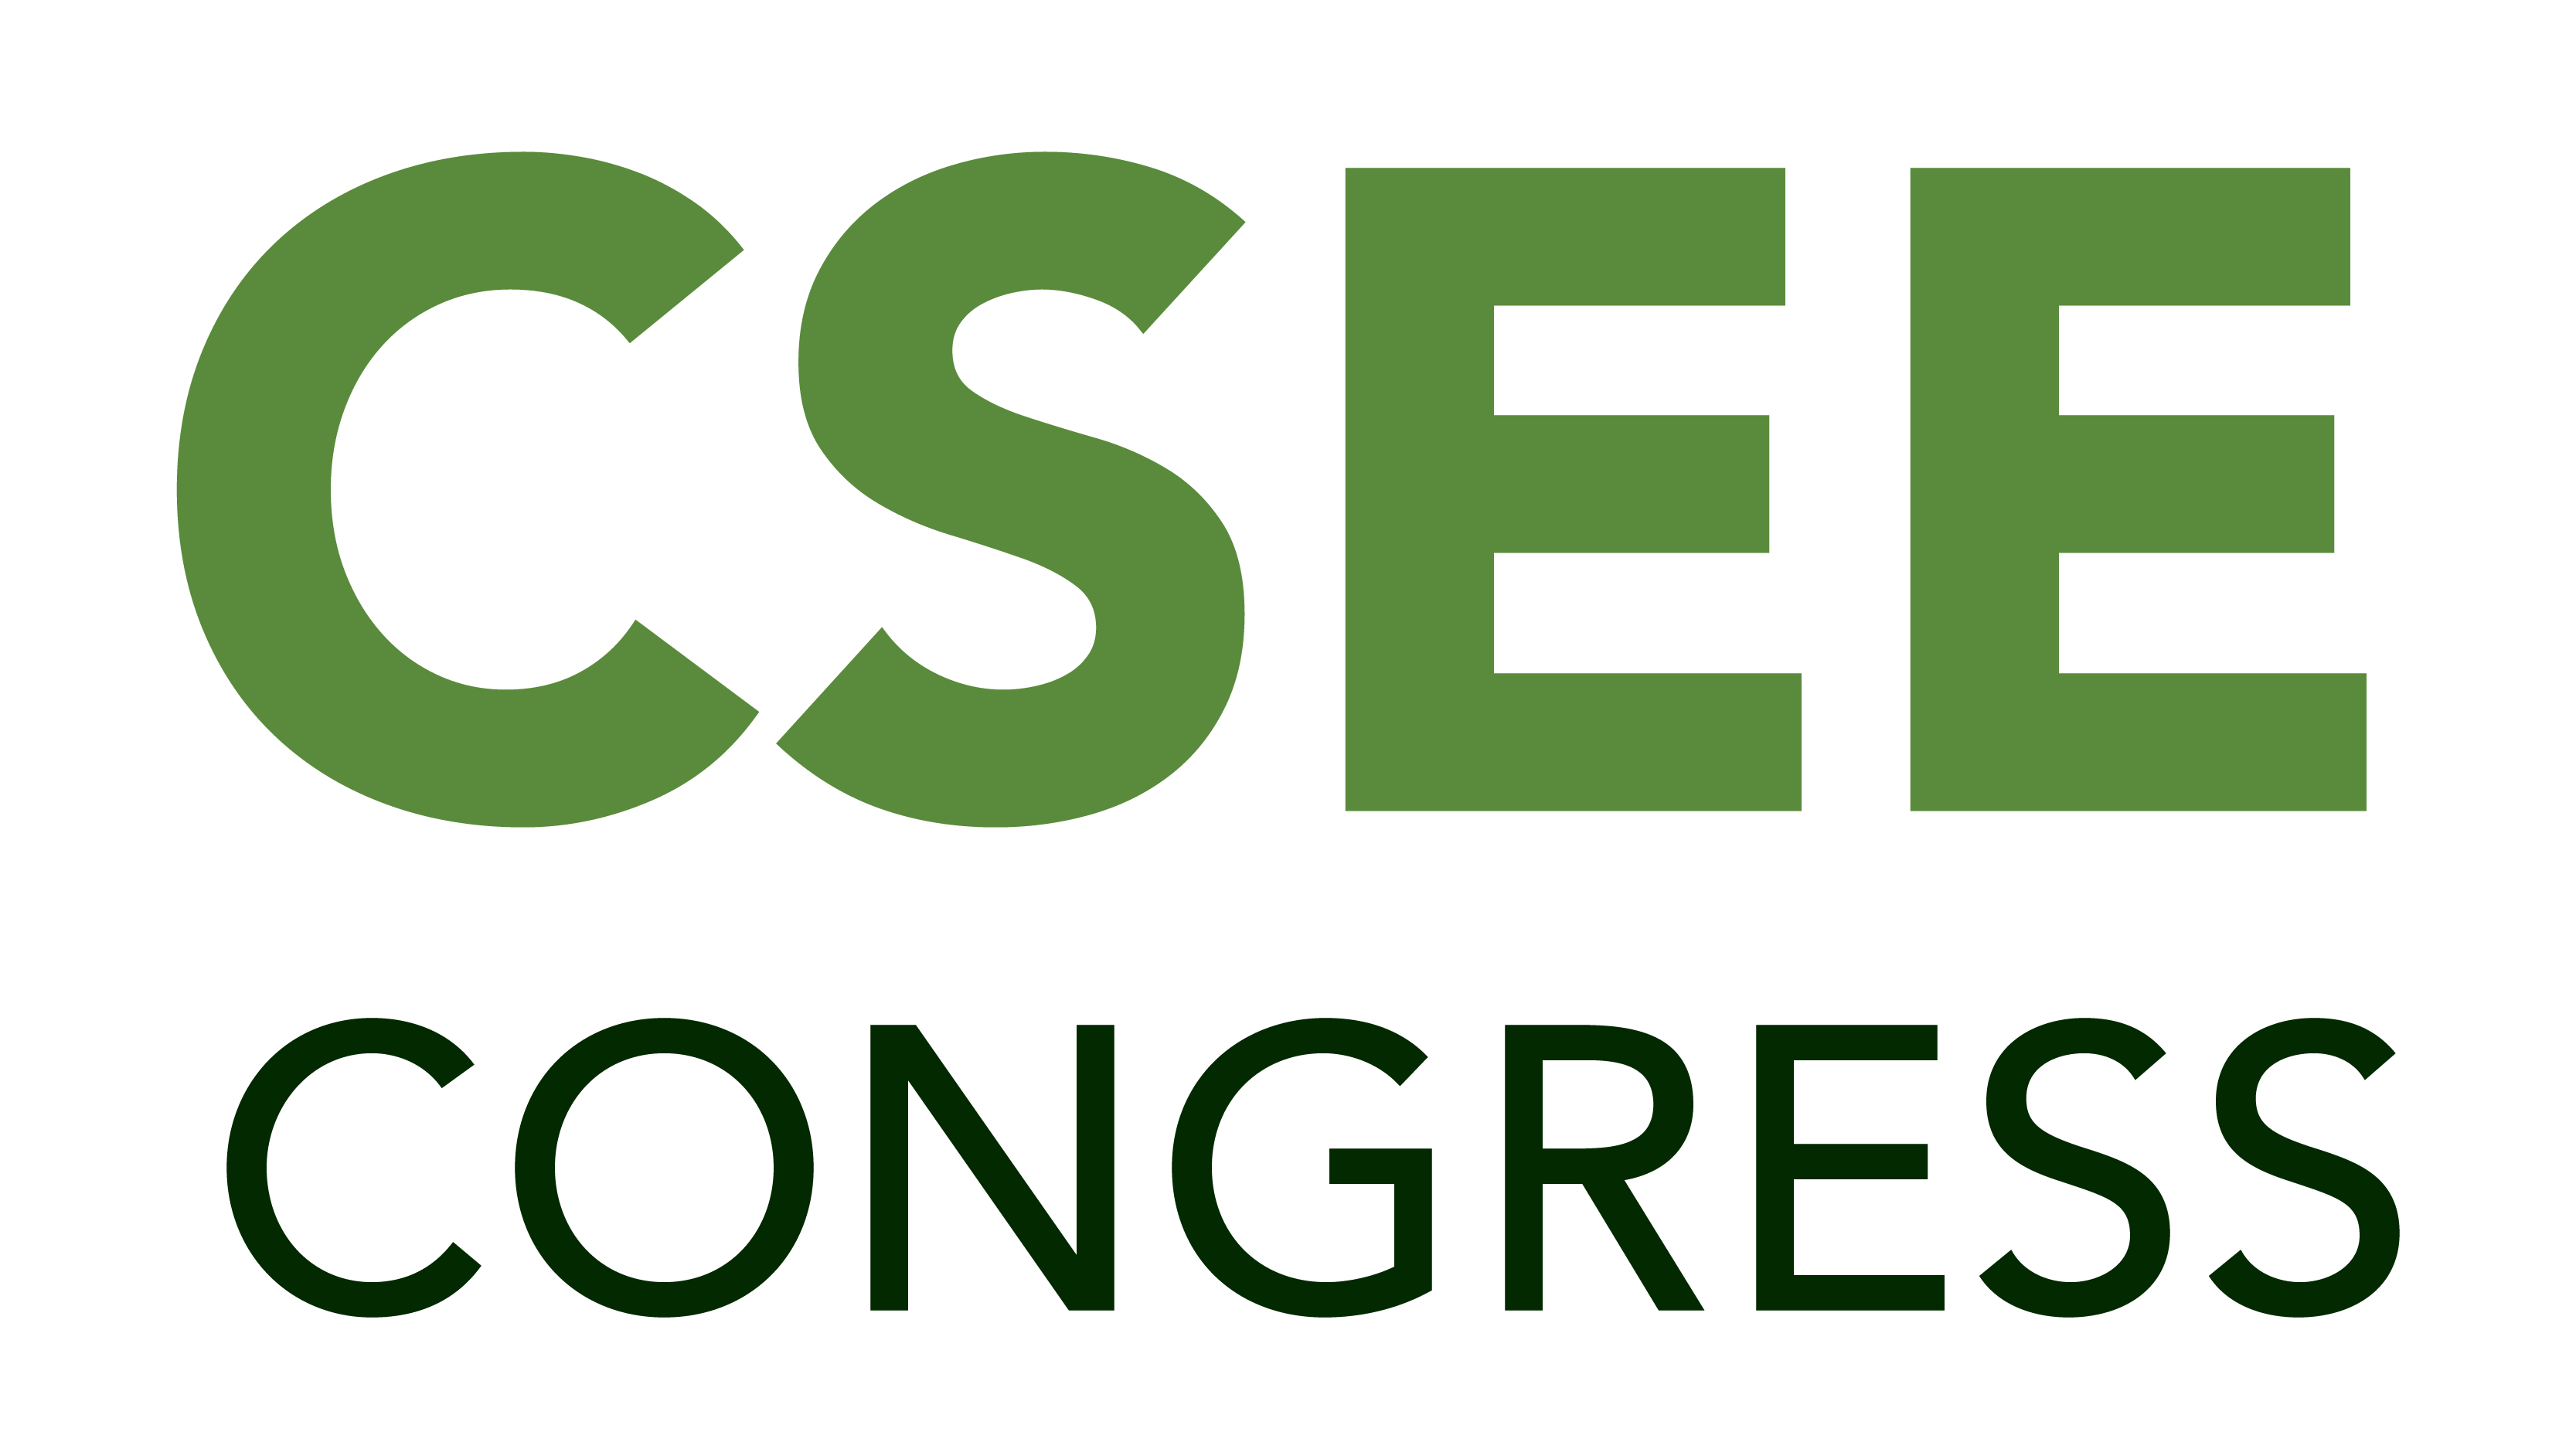 8th World Congress on Civil, Structural, and Environmental Engineering, April, 2022 |Virtually